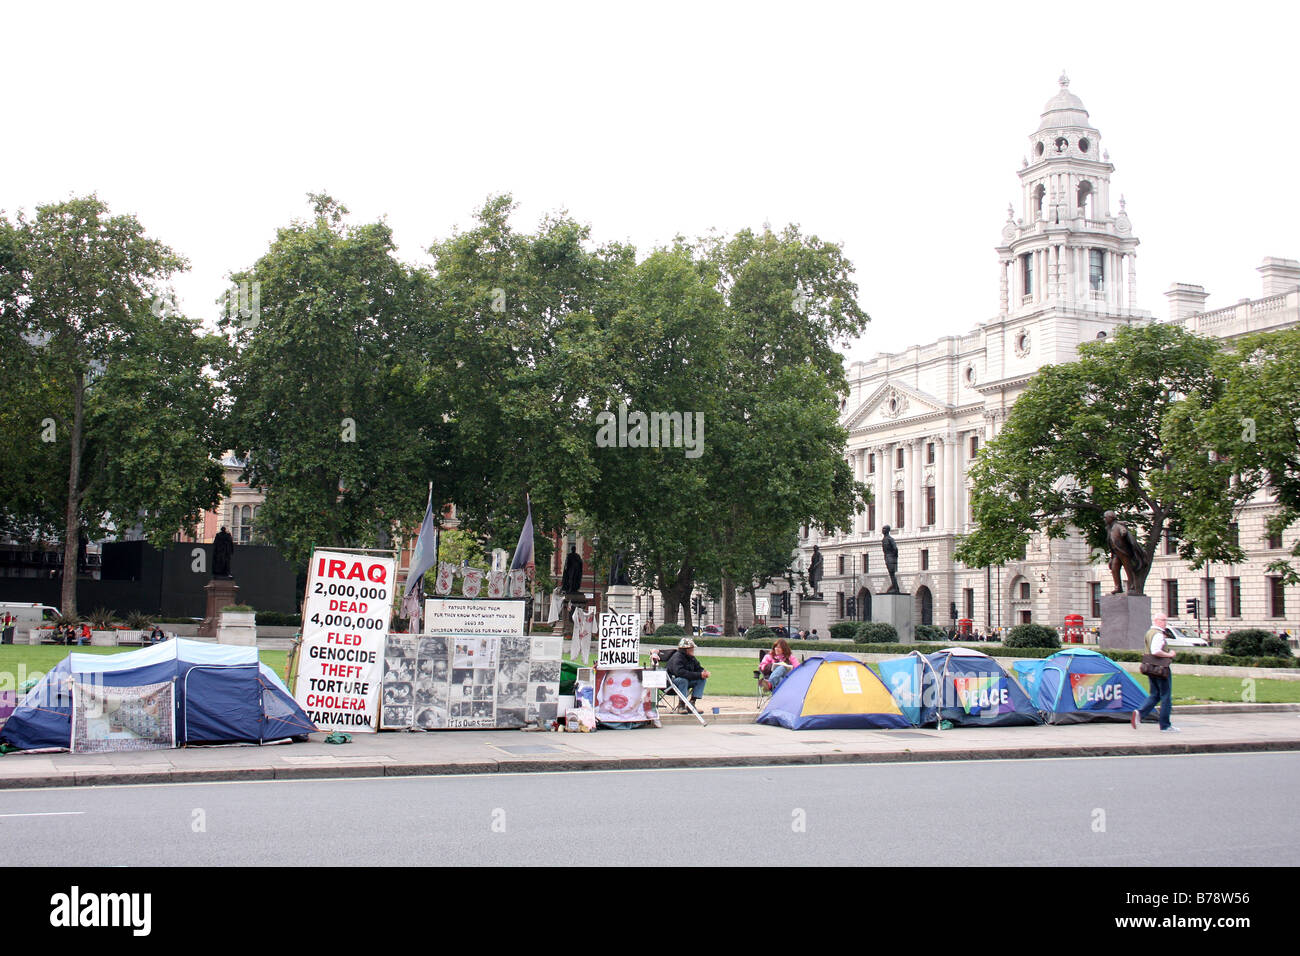 Protesters demonstrating about the Iraq war outside the Houses of Parliament in London. Stock Photo